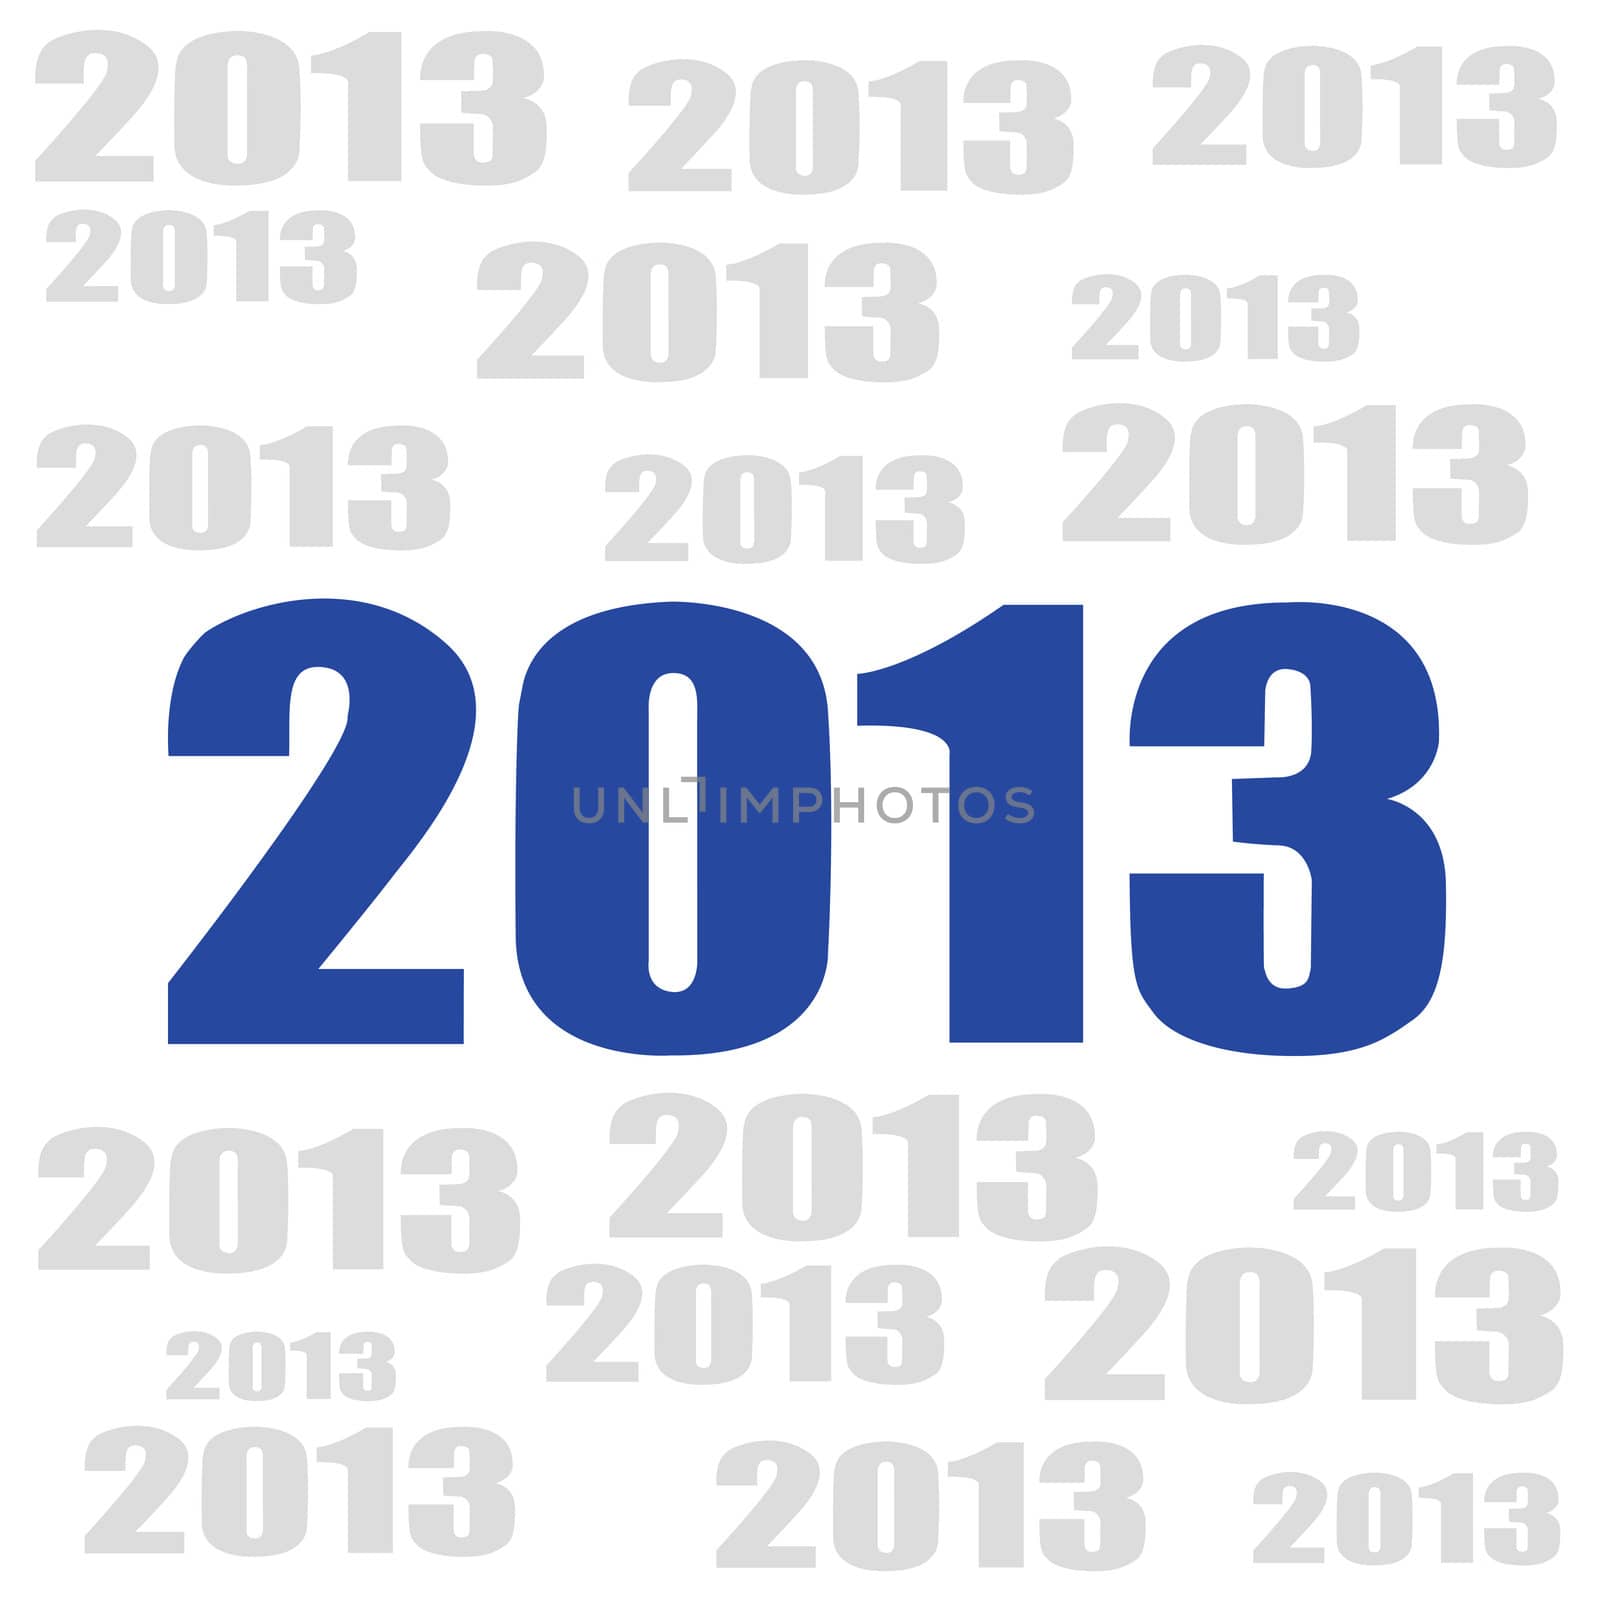 2013 year is coming soon.